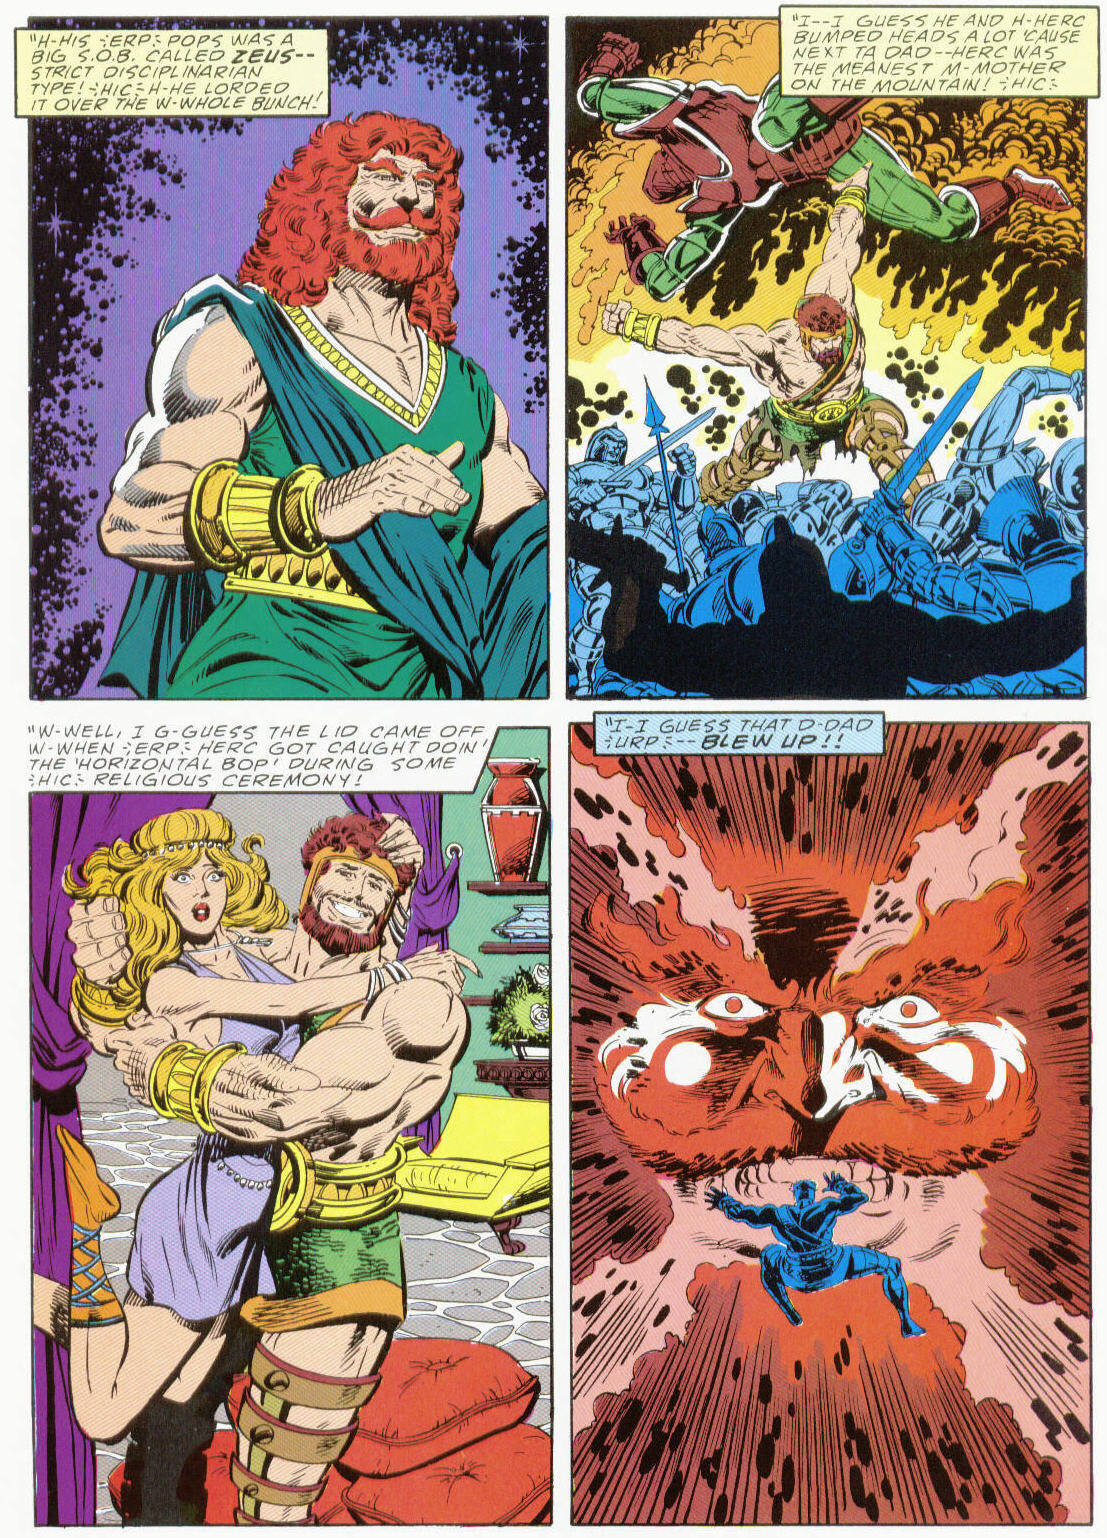 Marvel Graphic Novel issue 37 - Hercules Prince of Power - Full Circle - Page 10